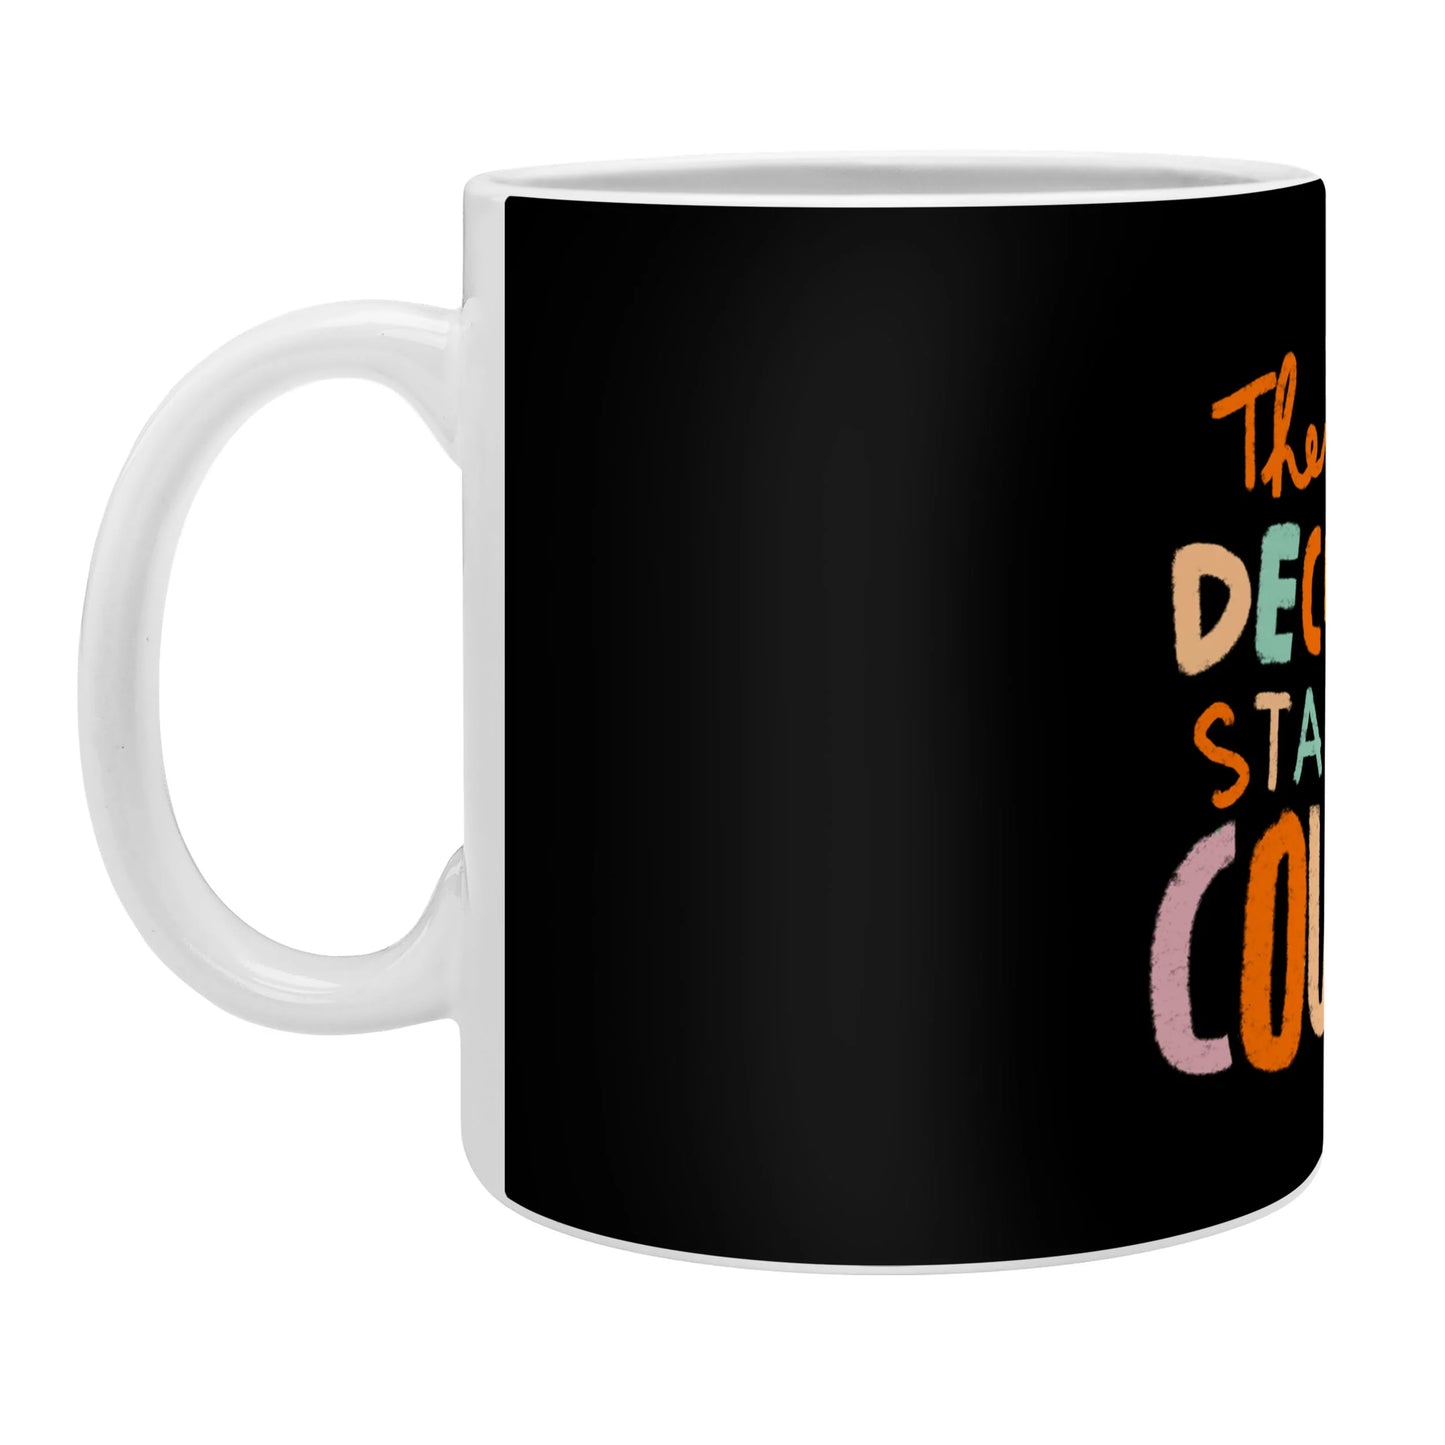 THE BEST DECISIONS START WITH COURAGE COFFEE MUG